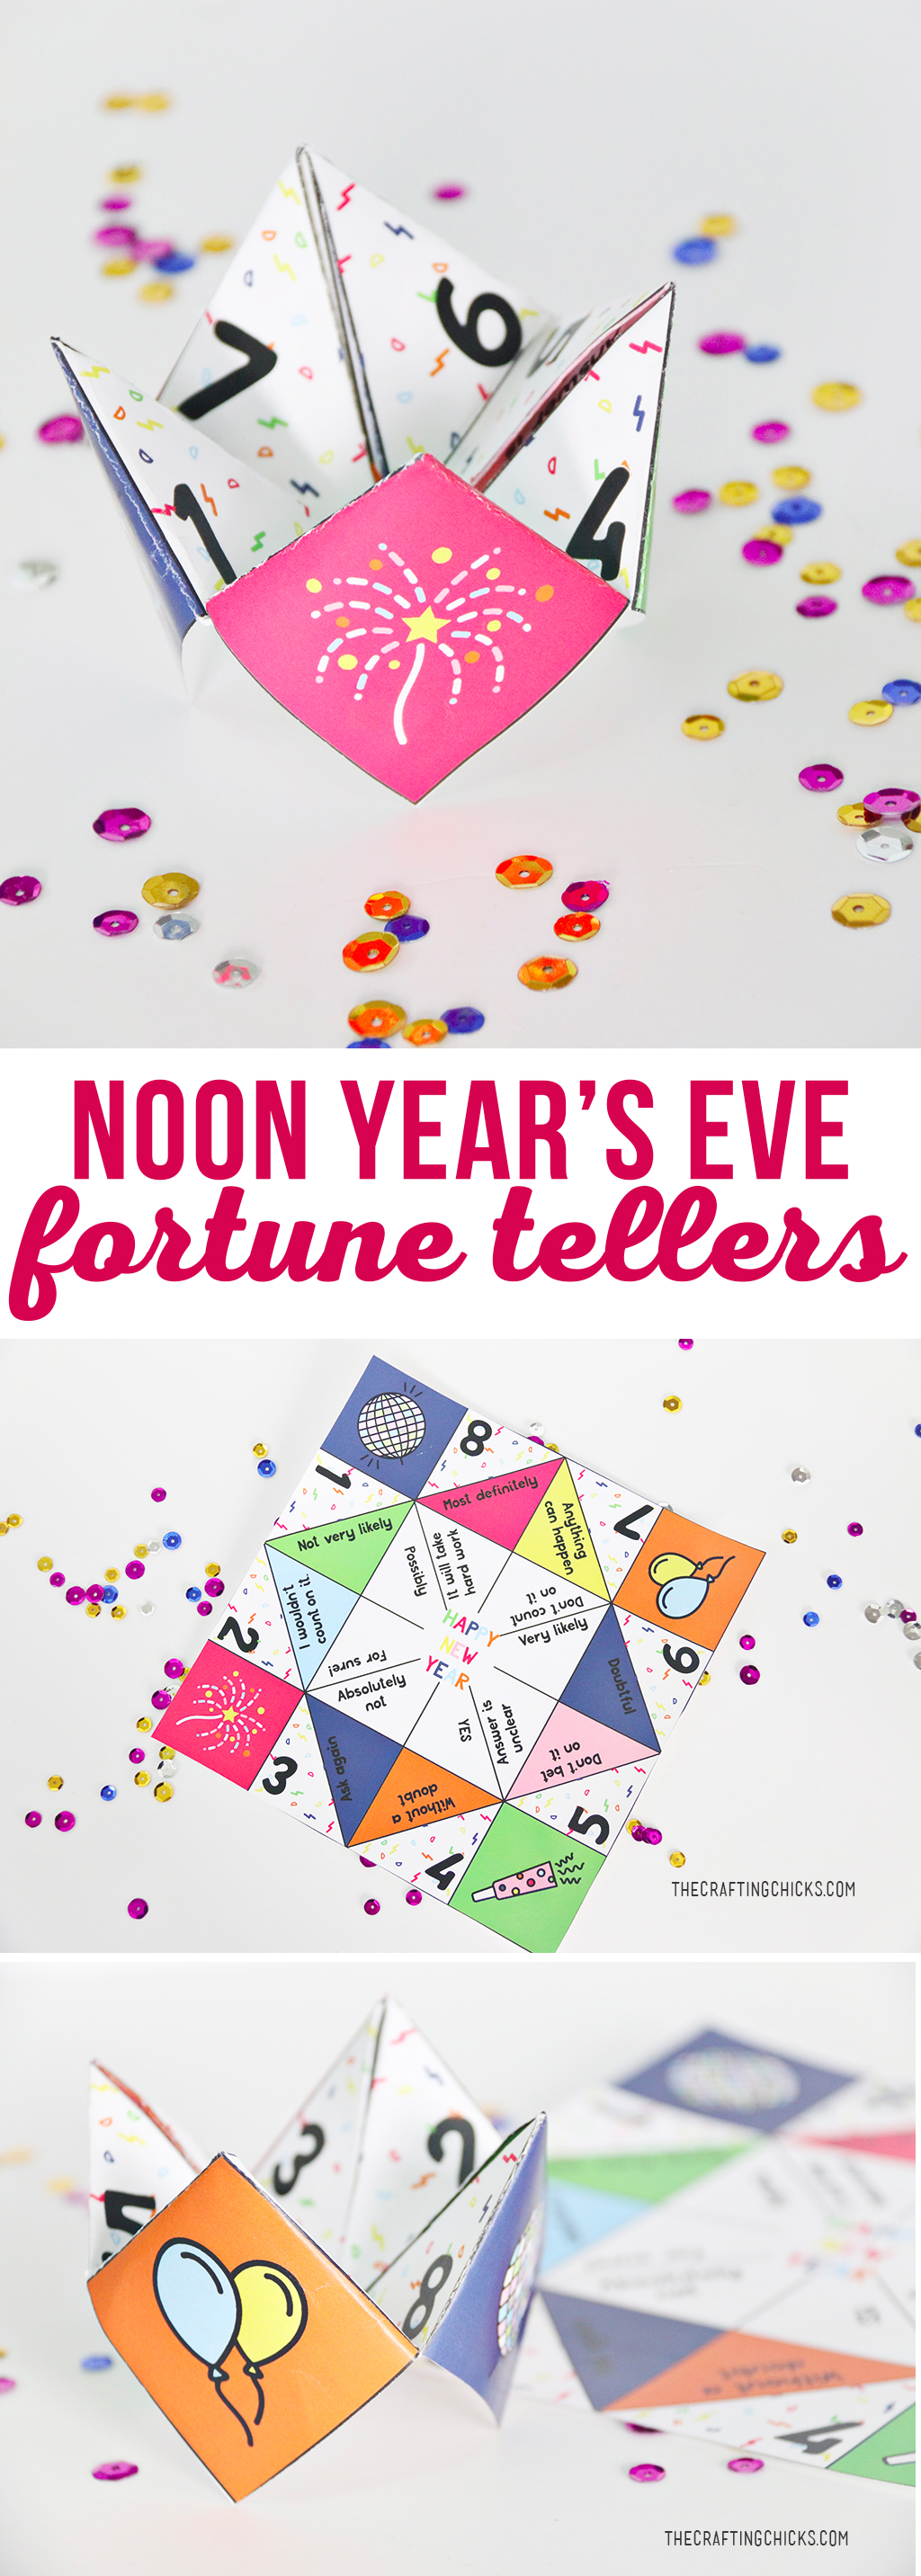 These New Years Fortune Teller Printables are a fun activity for kids to do while they are waiting for the ball to drop. We used these printables in our New Year's Eve Kids' Countdown bags as an activity and they were a hit!